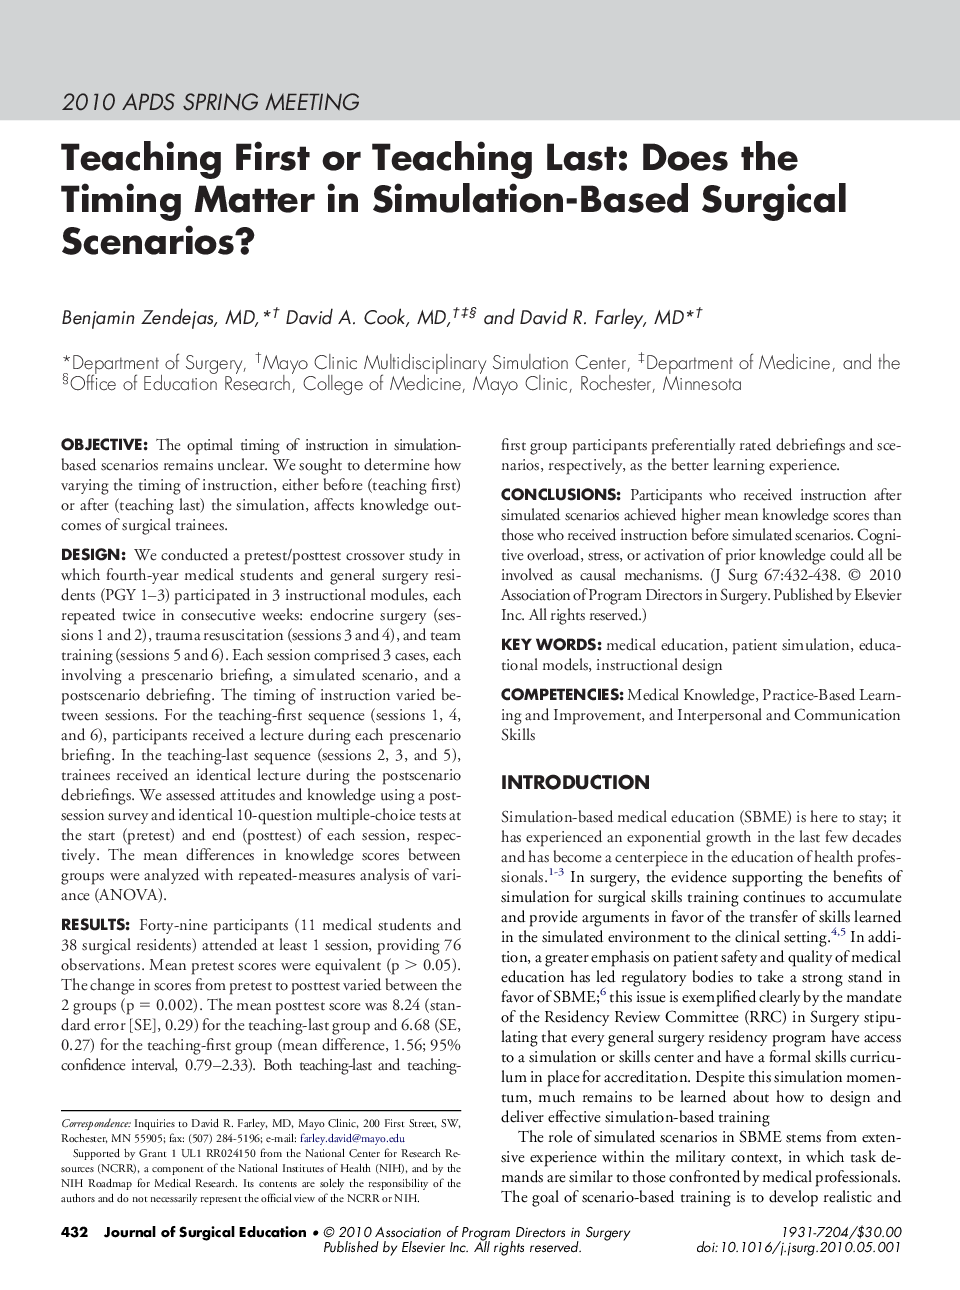 Teaching First or Teaching Last: Does the Timing Matter in Simulation-Based Surgical Scenarios? 